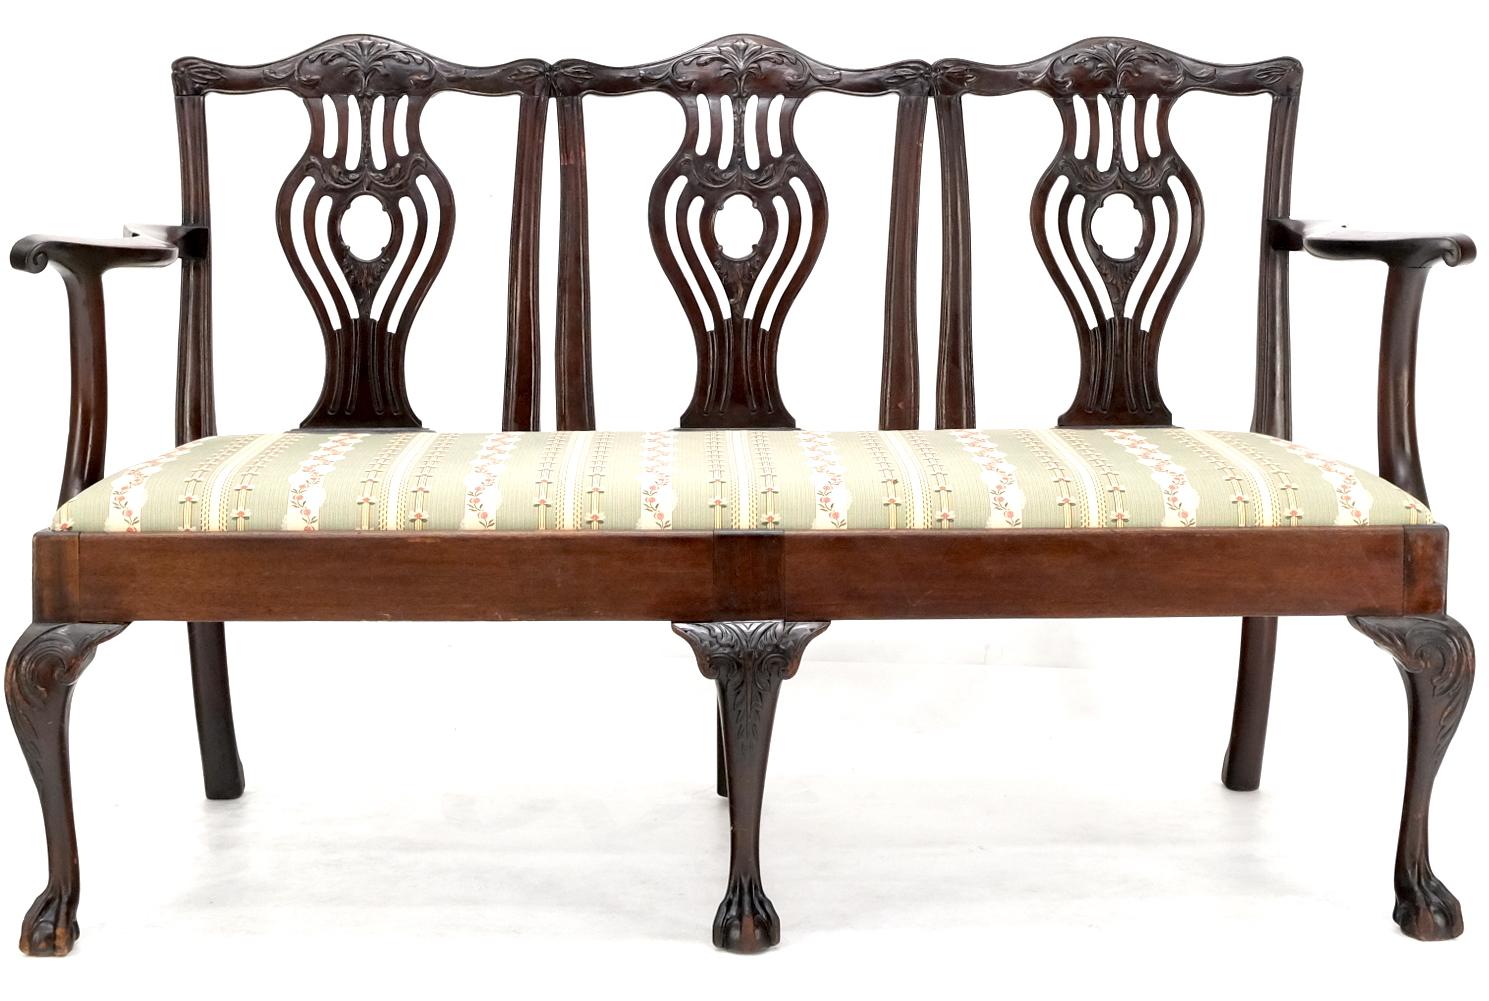 19th Century Triple Ball & Claw Armchair Style Settee Bench Sofa Chippendale In Good Condition For Sale In Rockaway, NJ